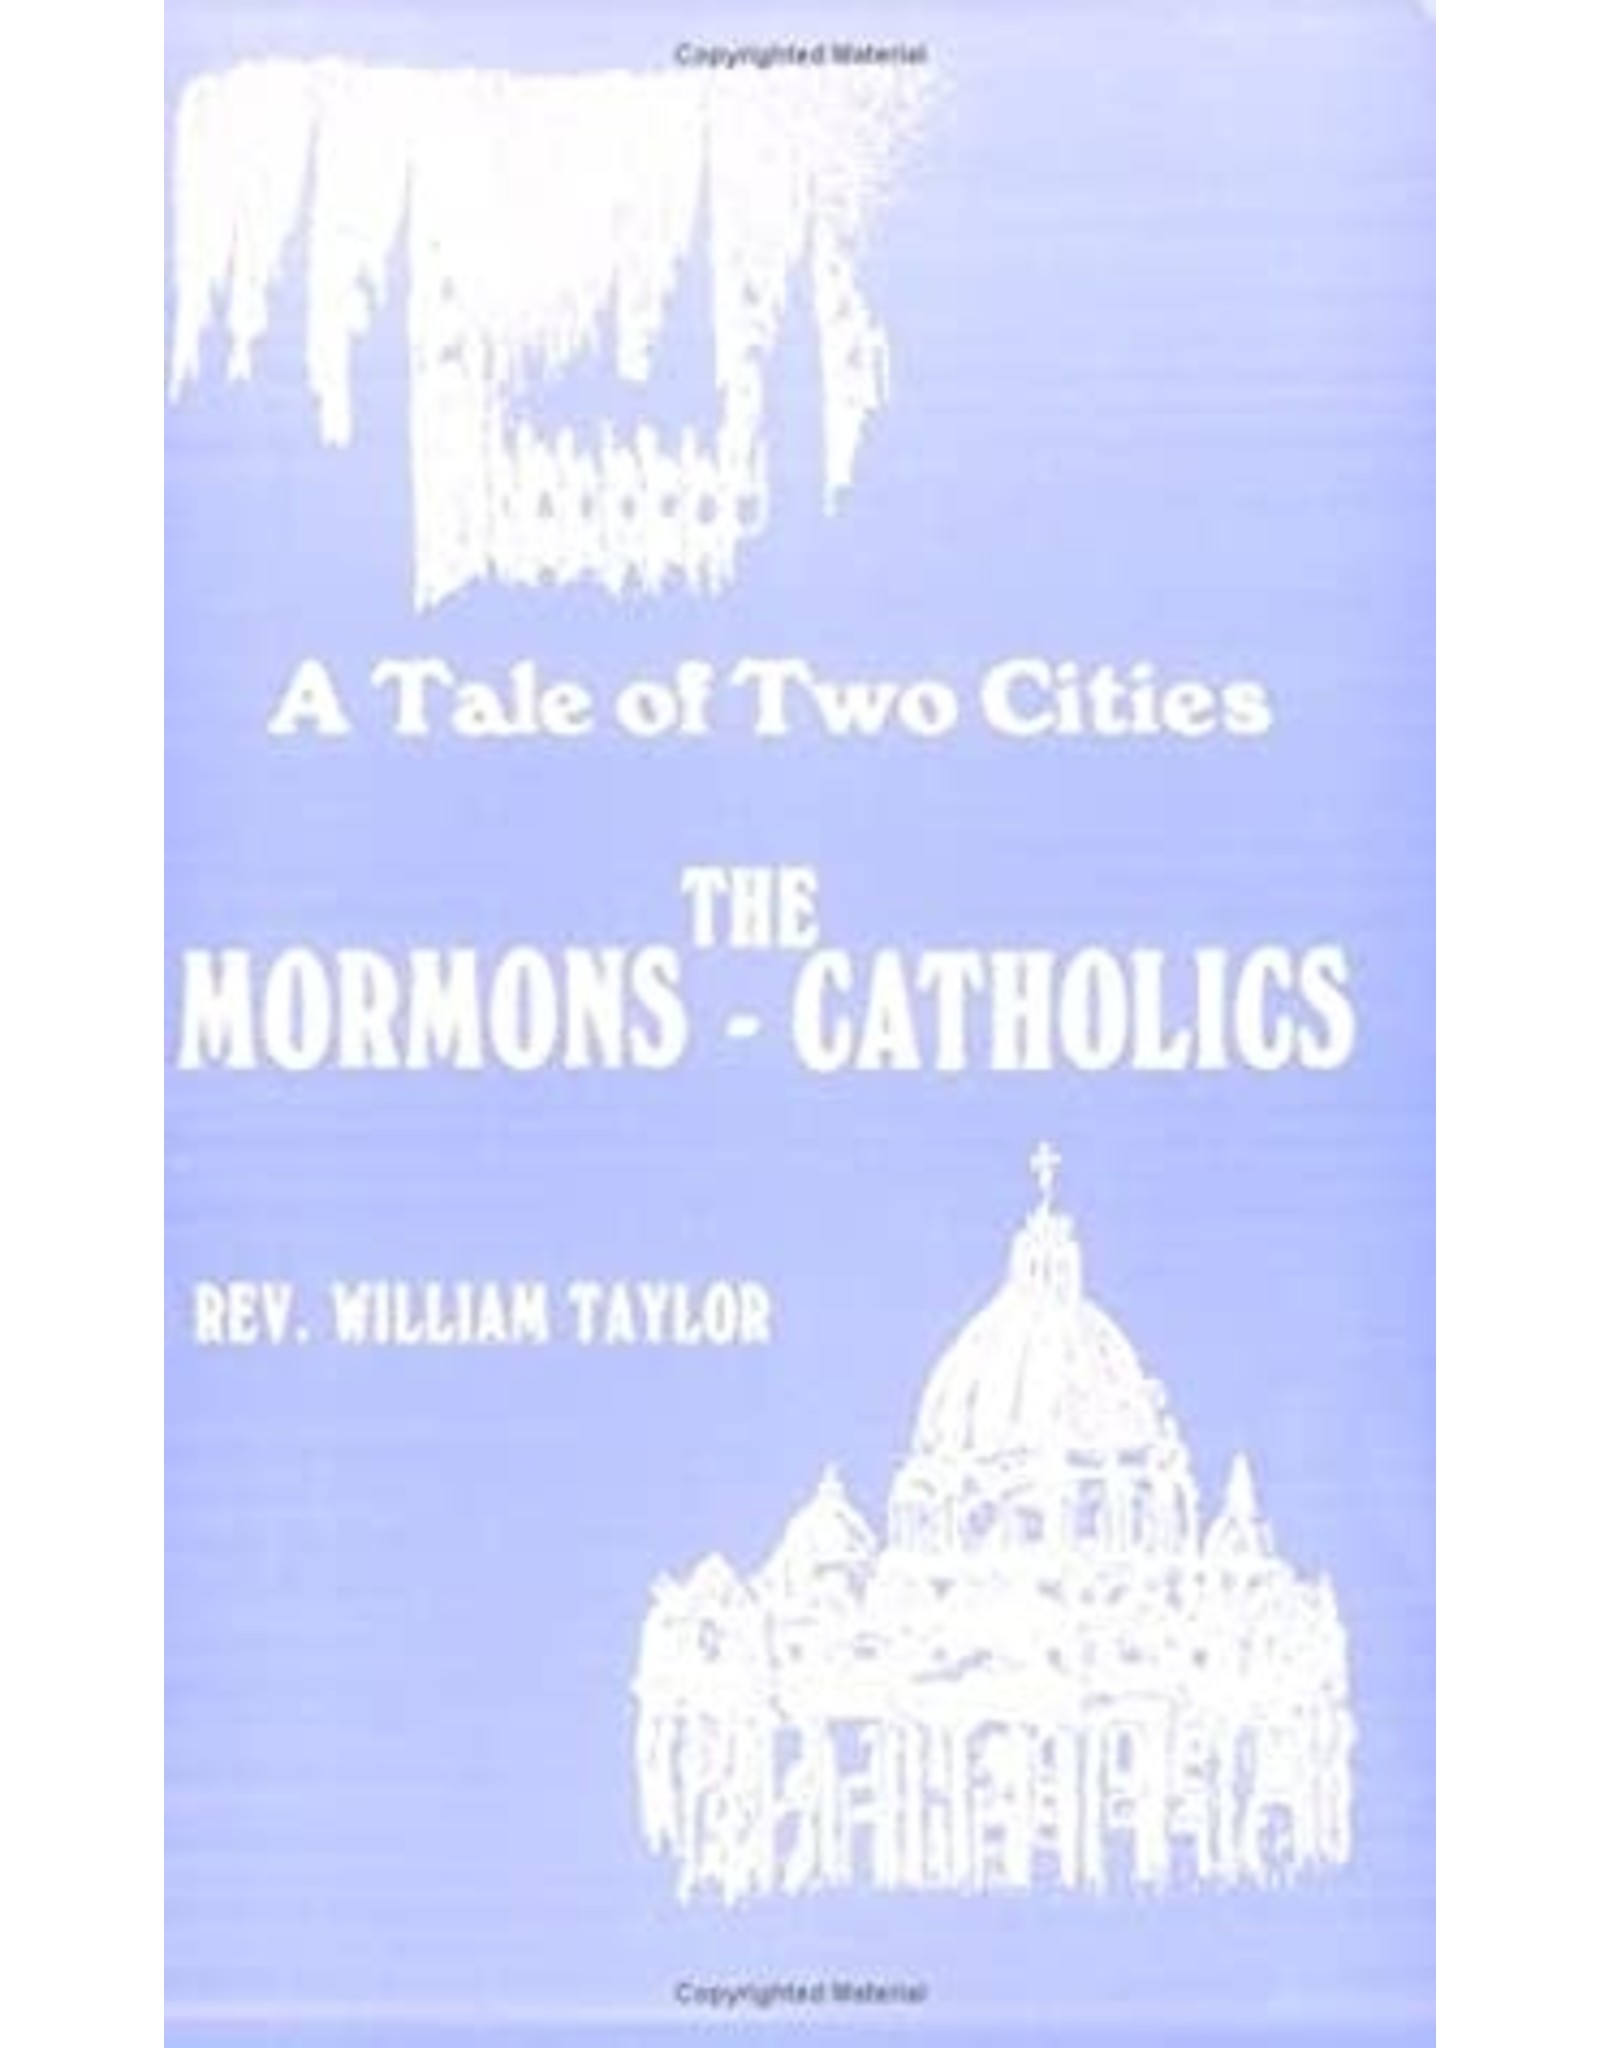 A Tale of Two Cities: The Mormons-Catholics